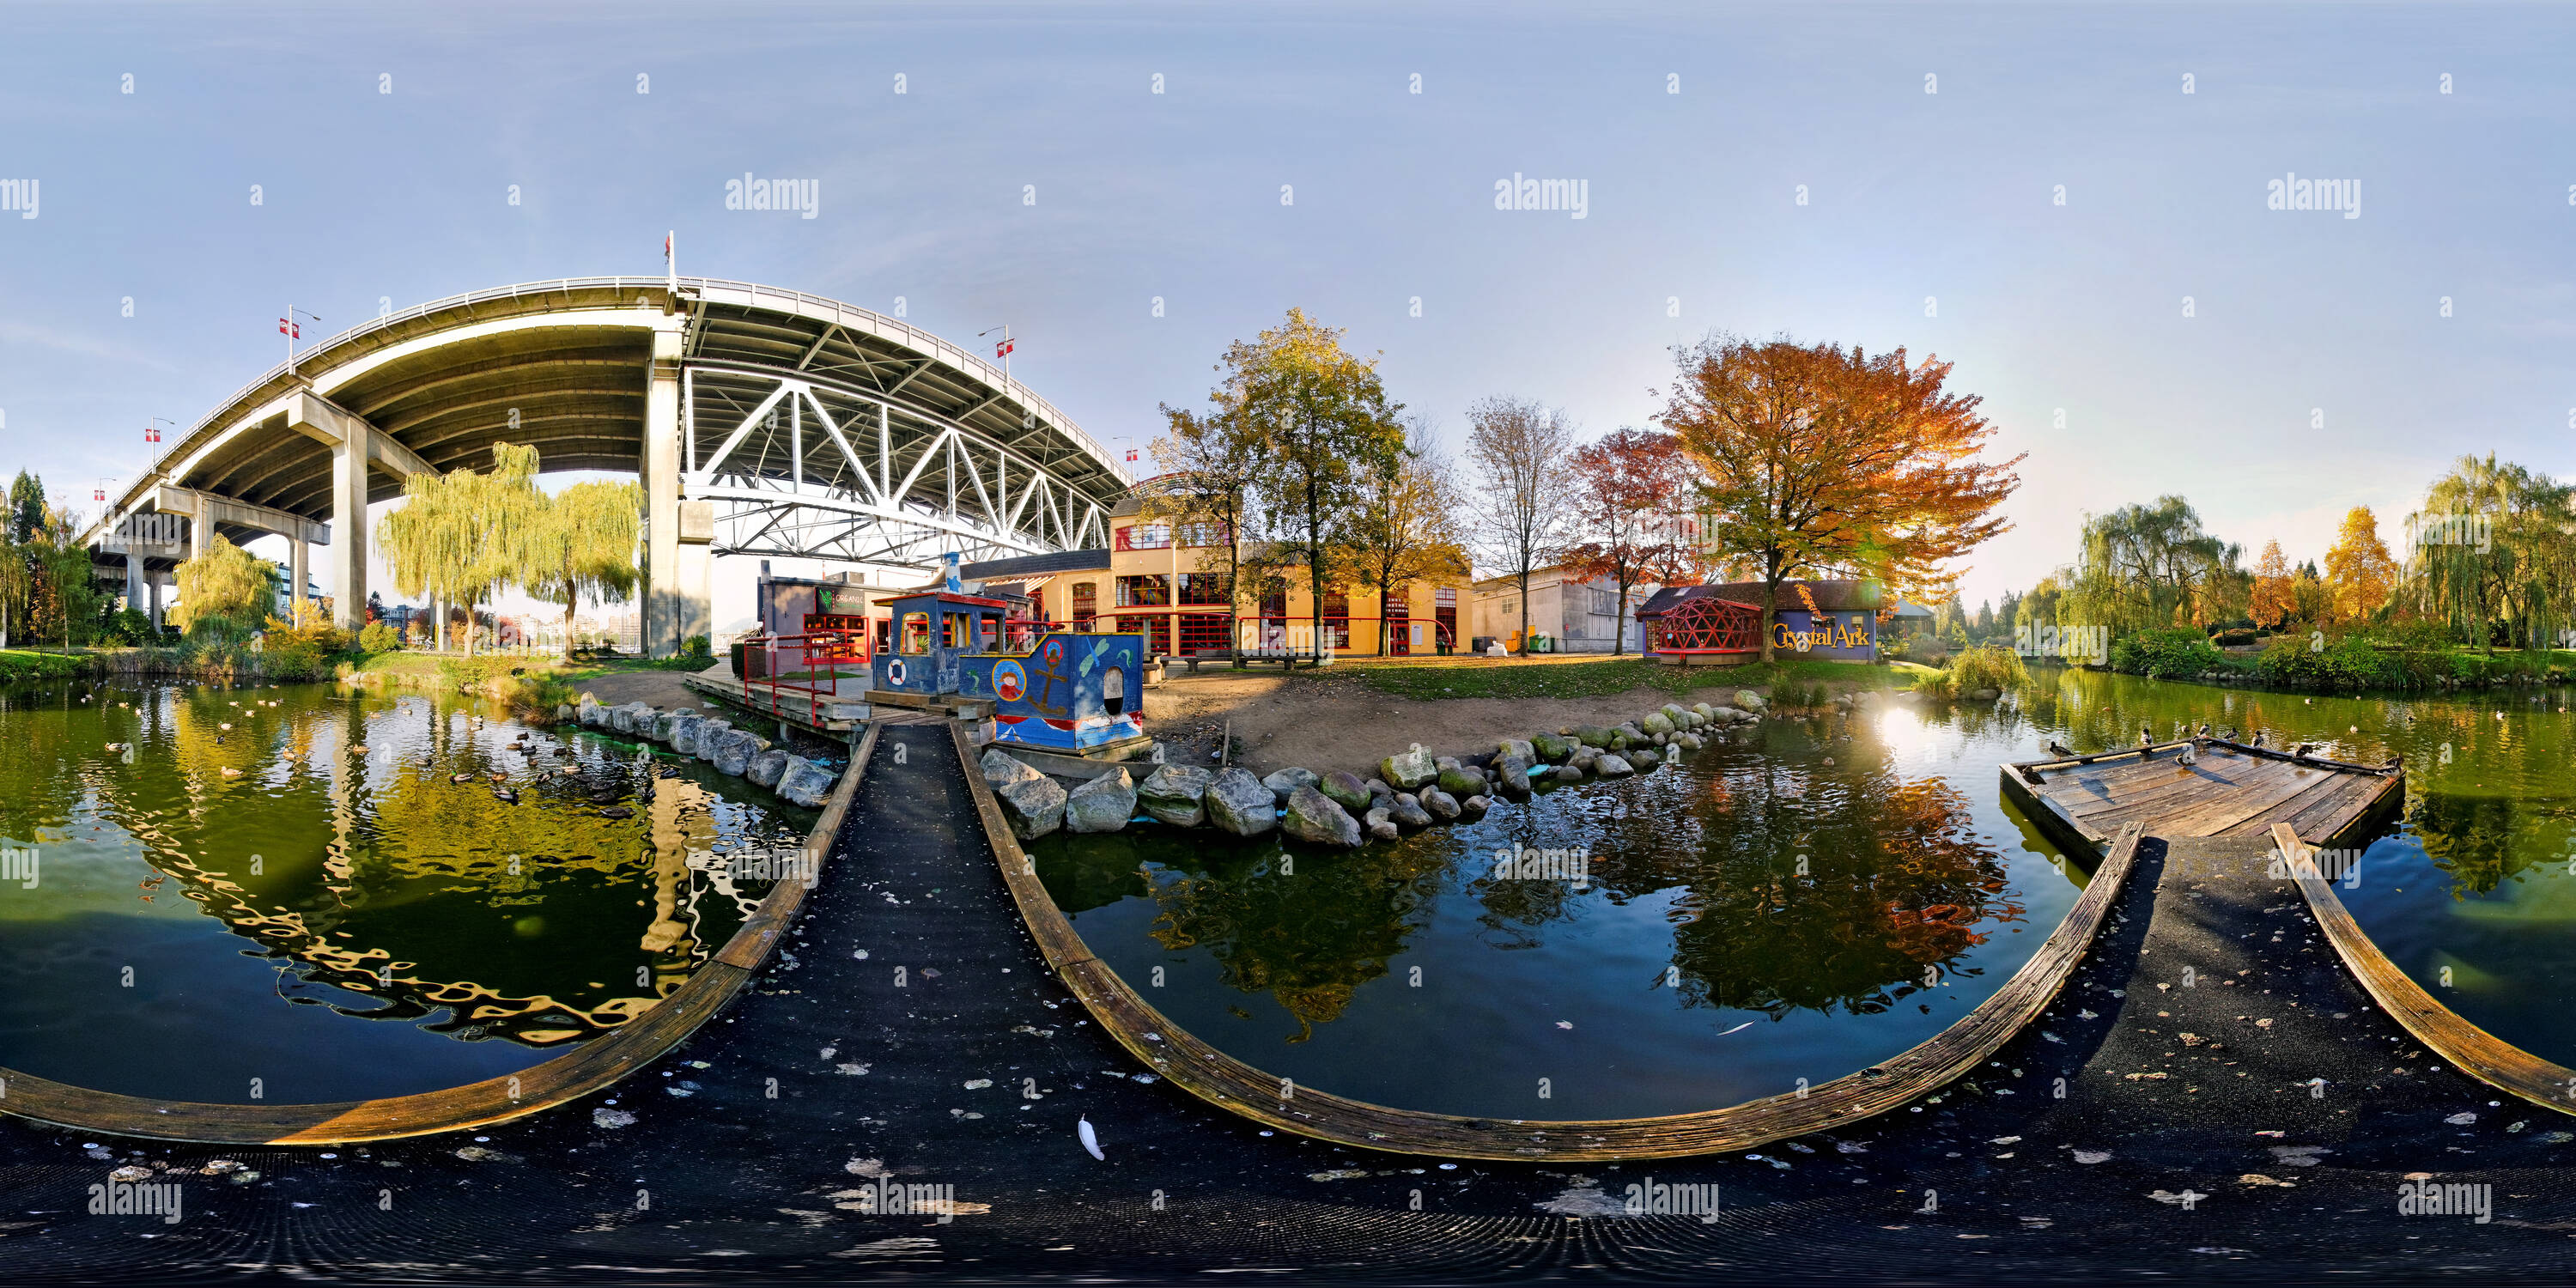 360 degree panoramic view of Granville Island, Vancouver, Canada